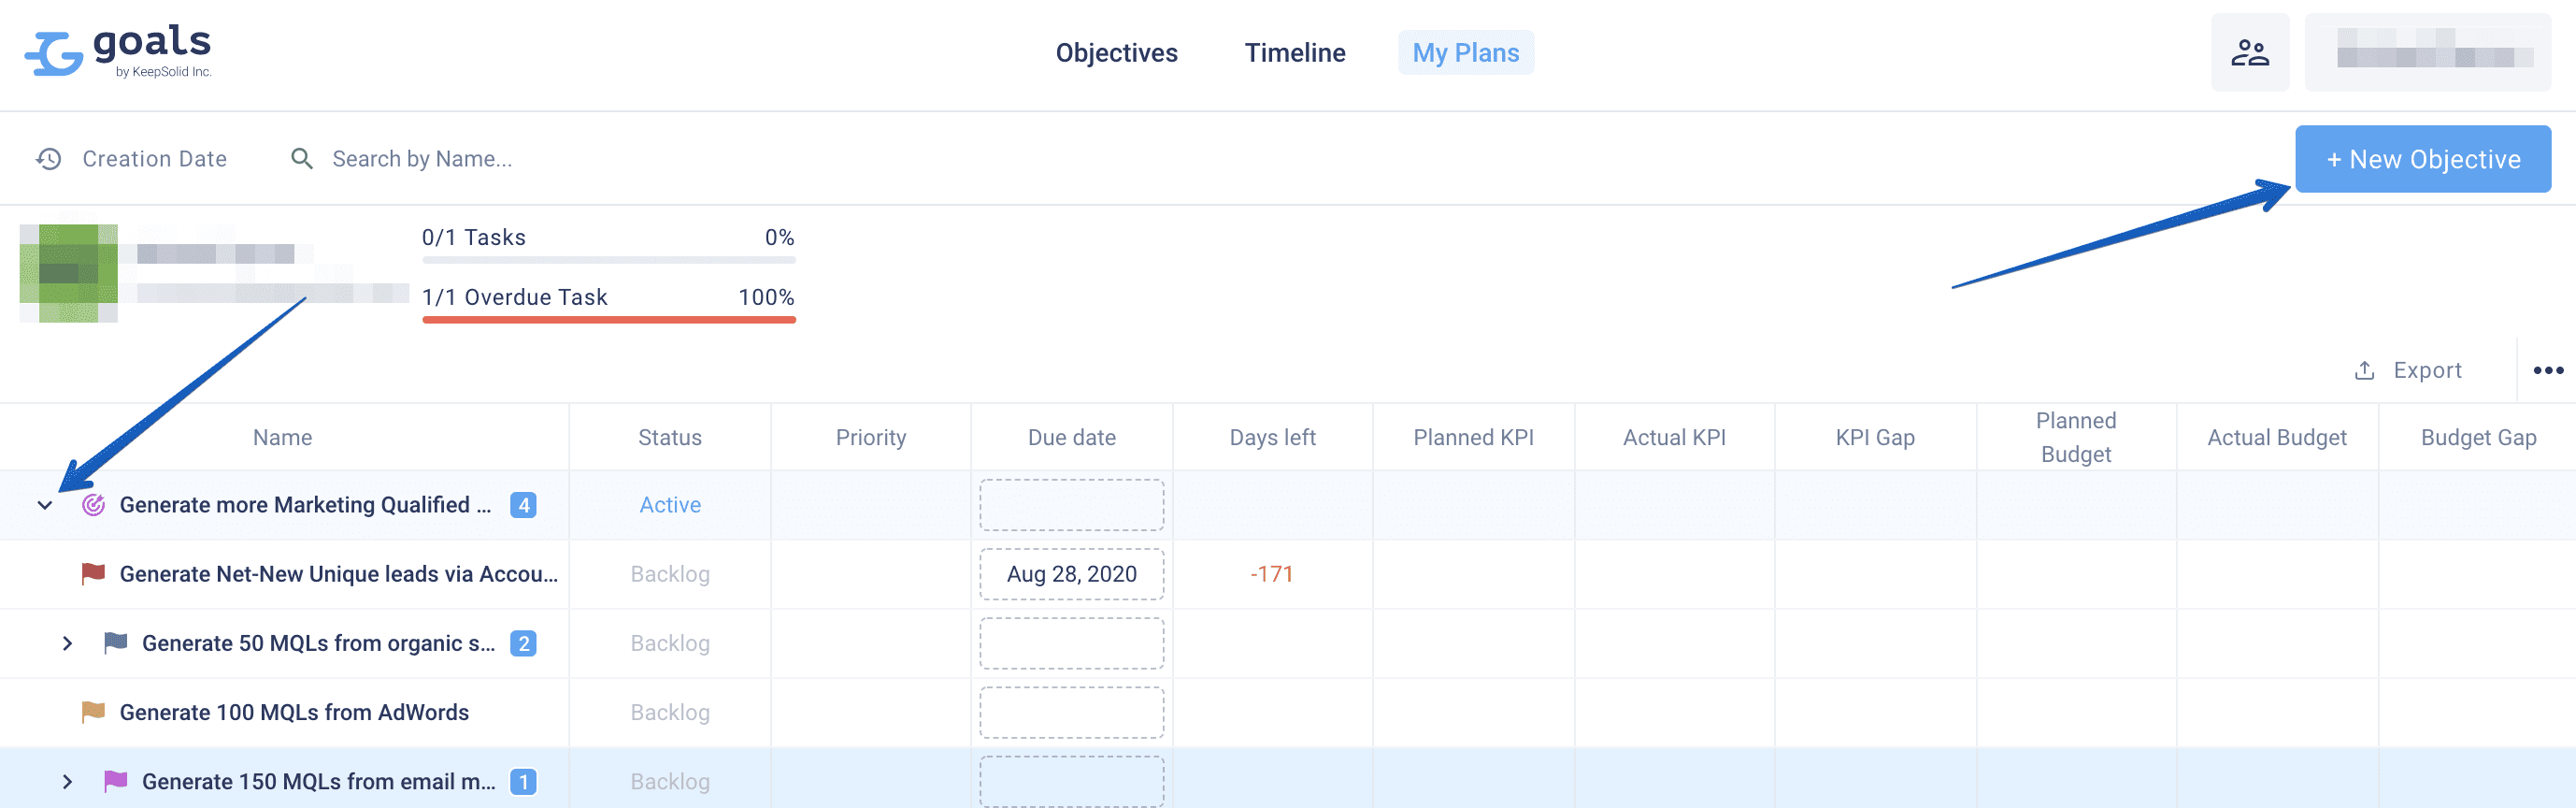 Objective's Key Results and Adding New Objectives in the My Plans tab